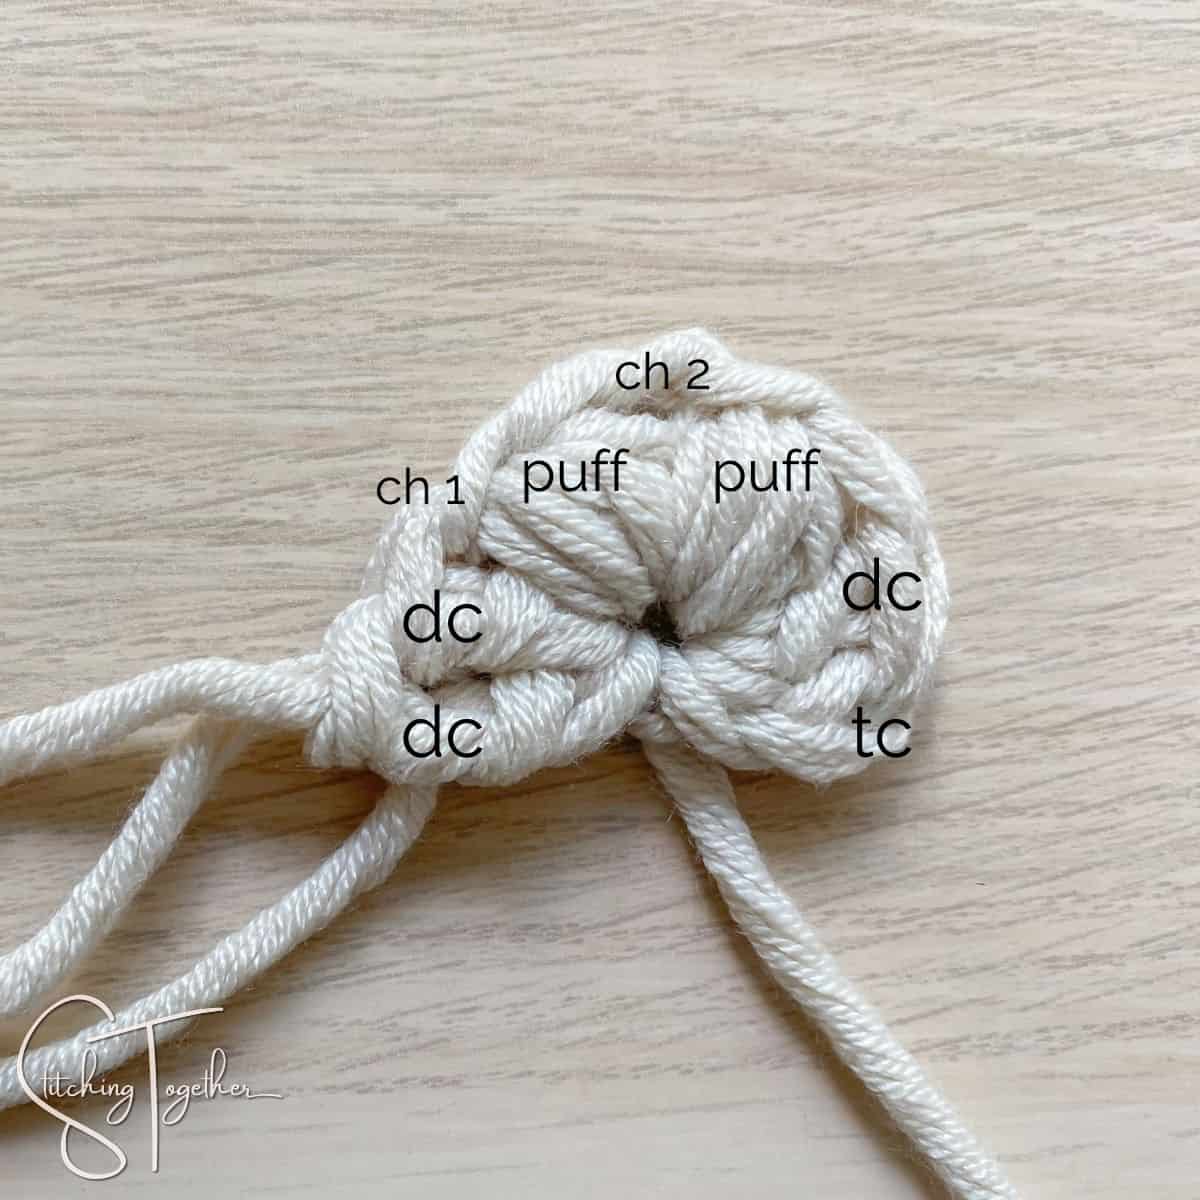 labeled crochet stitches in the start of a crochet triangle